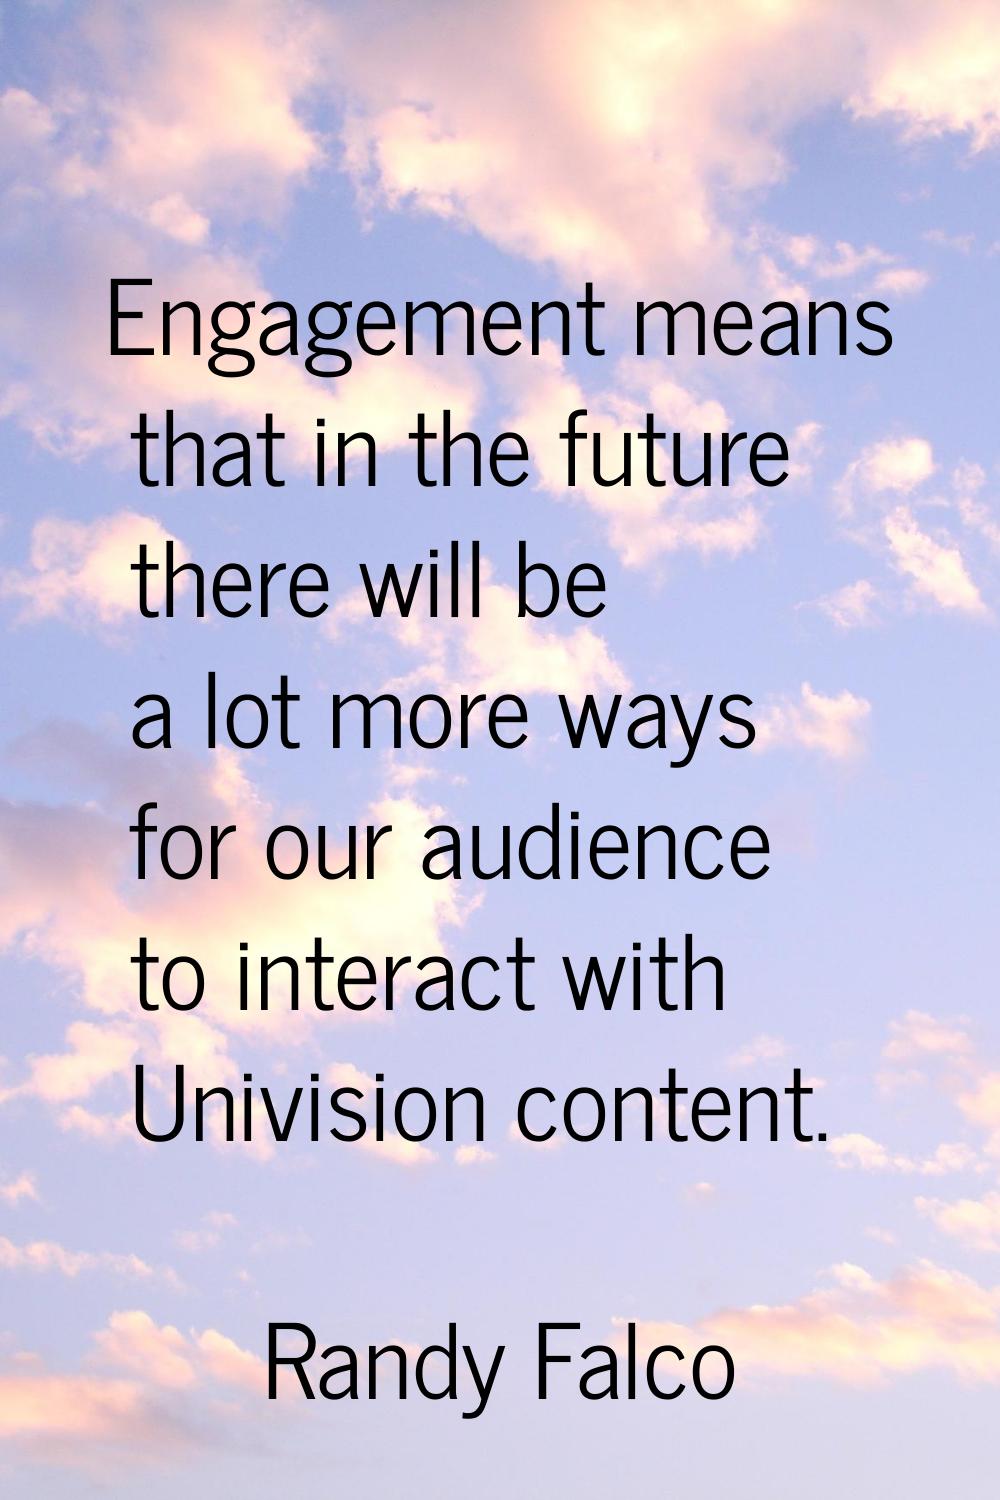 Engagement means that in the future there will be a lot more ways for our audience to interact with